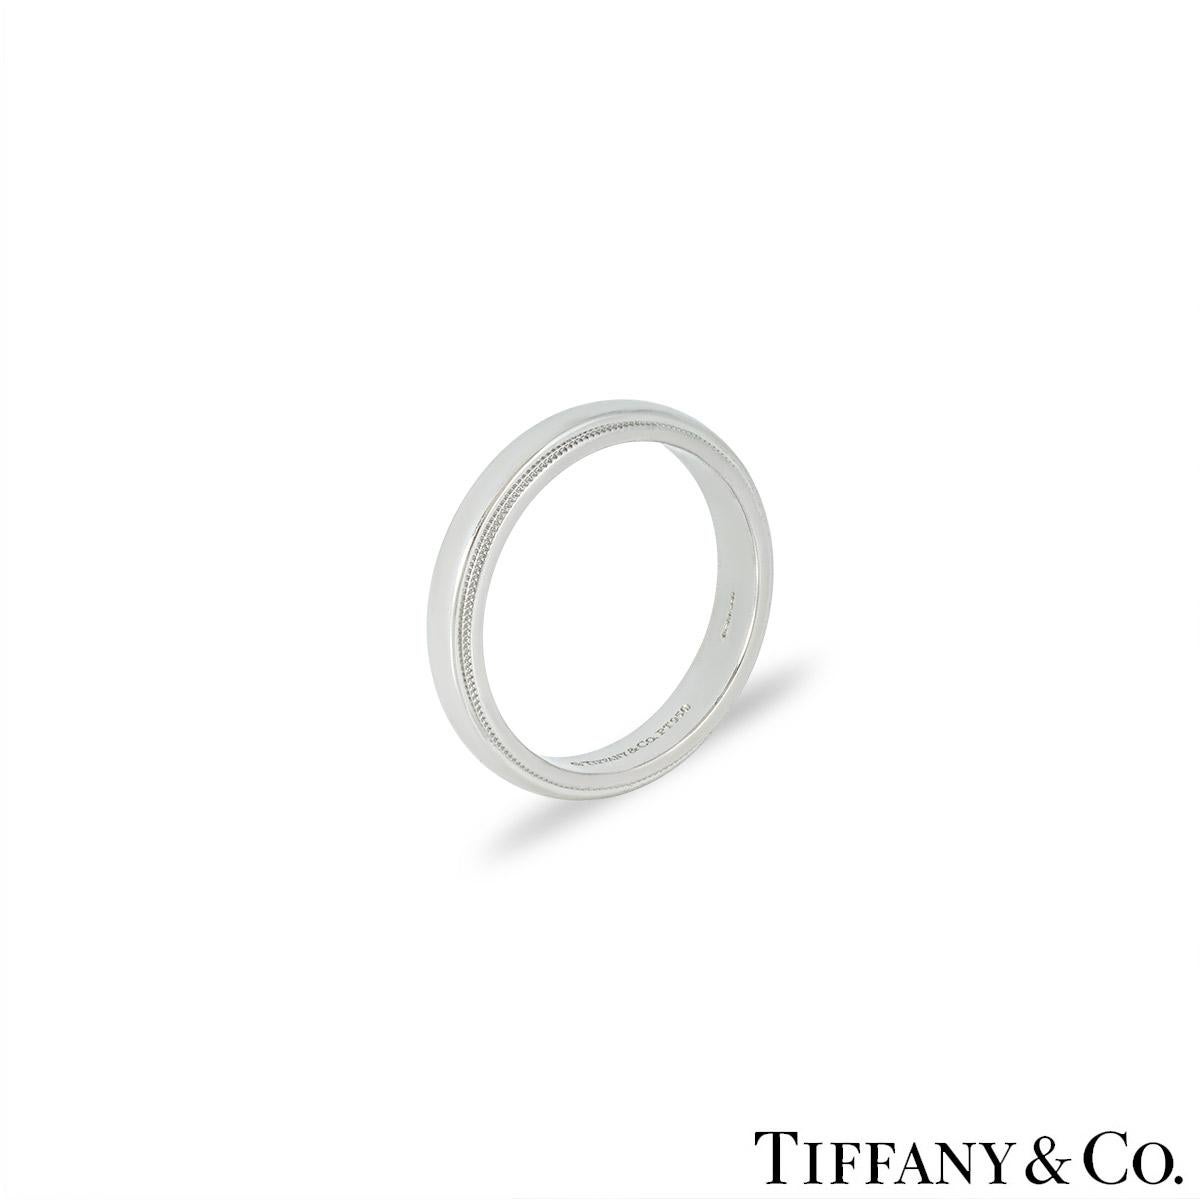 A modern platinum wedding band by Tiffany & Co. from the Tiffany Together collection. The ring features a high polish centre with textured milgrain edges. It measures 4mm in width, is a size UK T - EU 61 and has a gross weight of 10.01 grams.

Comes